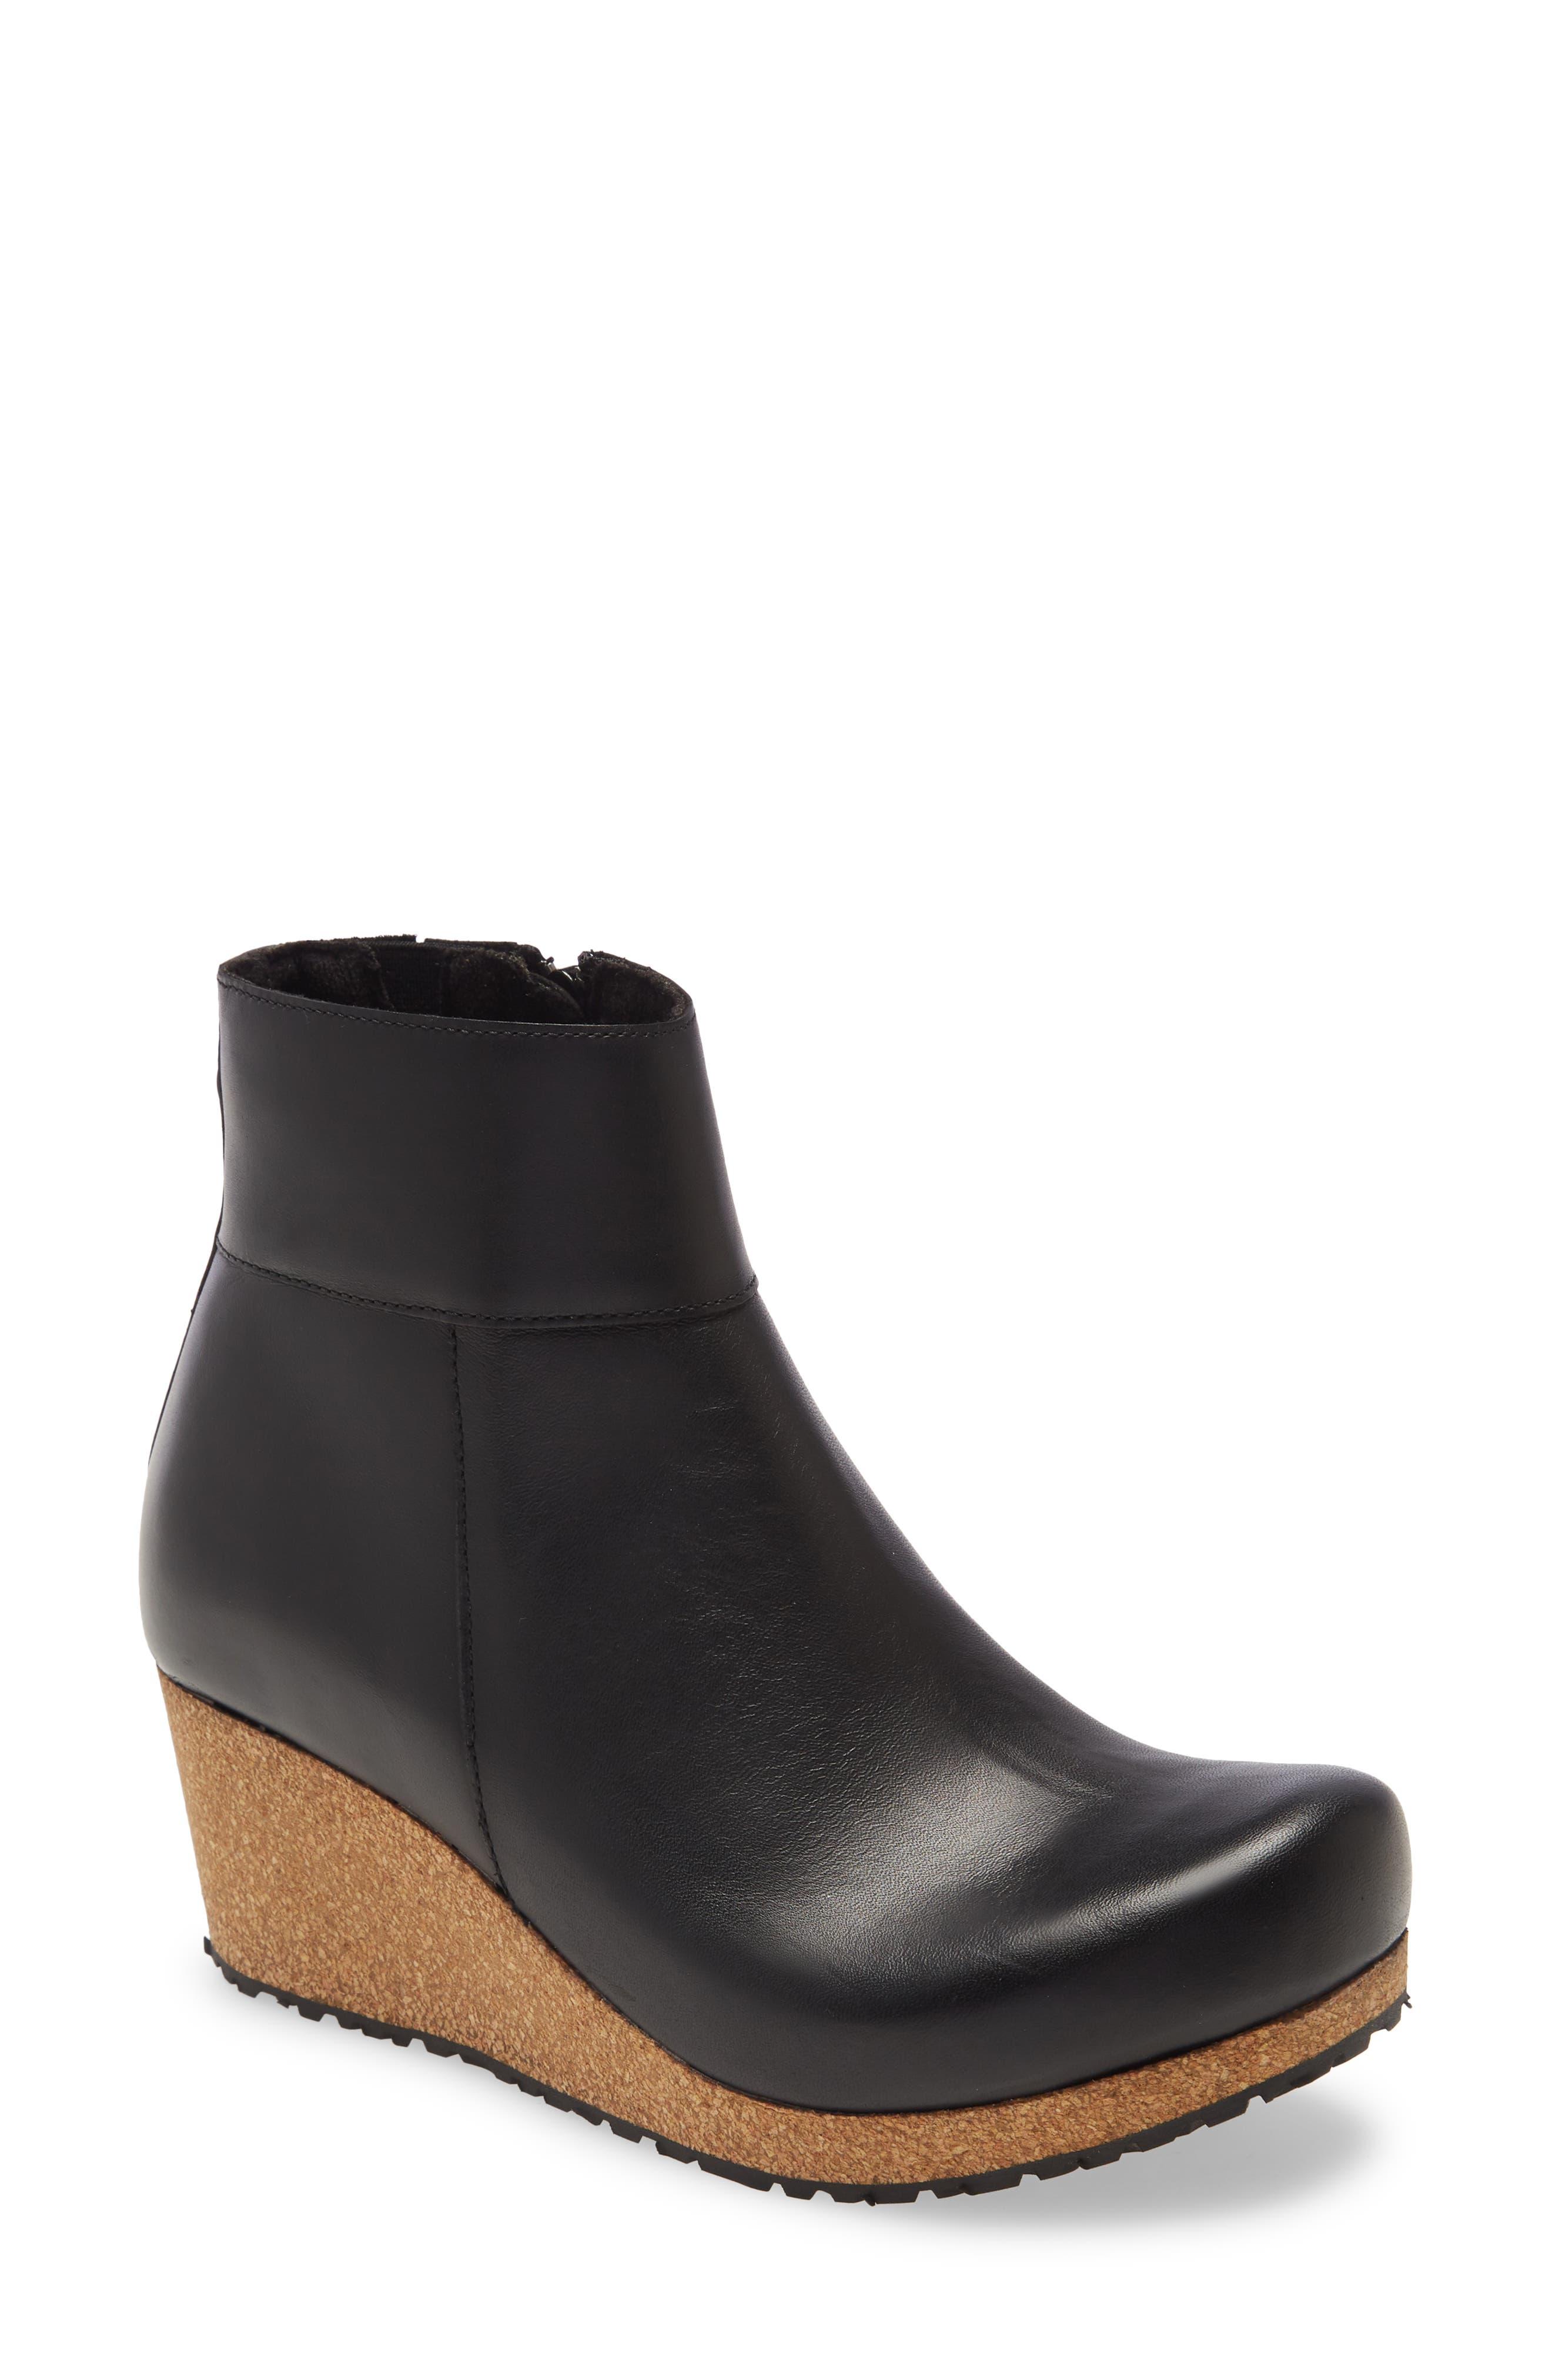 ecco shiver wedge ankle boot